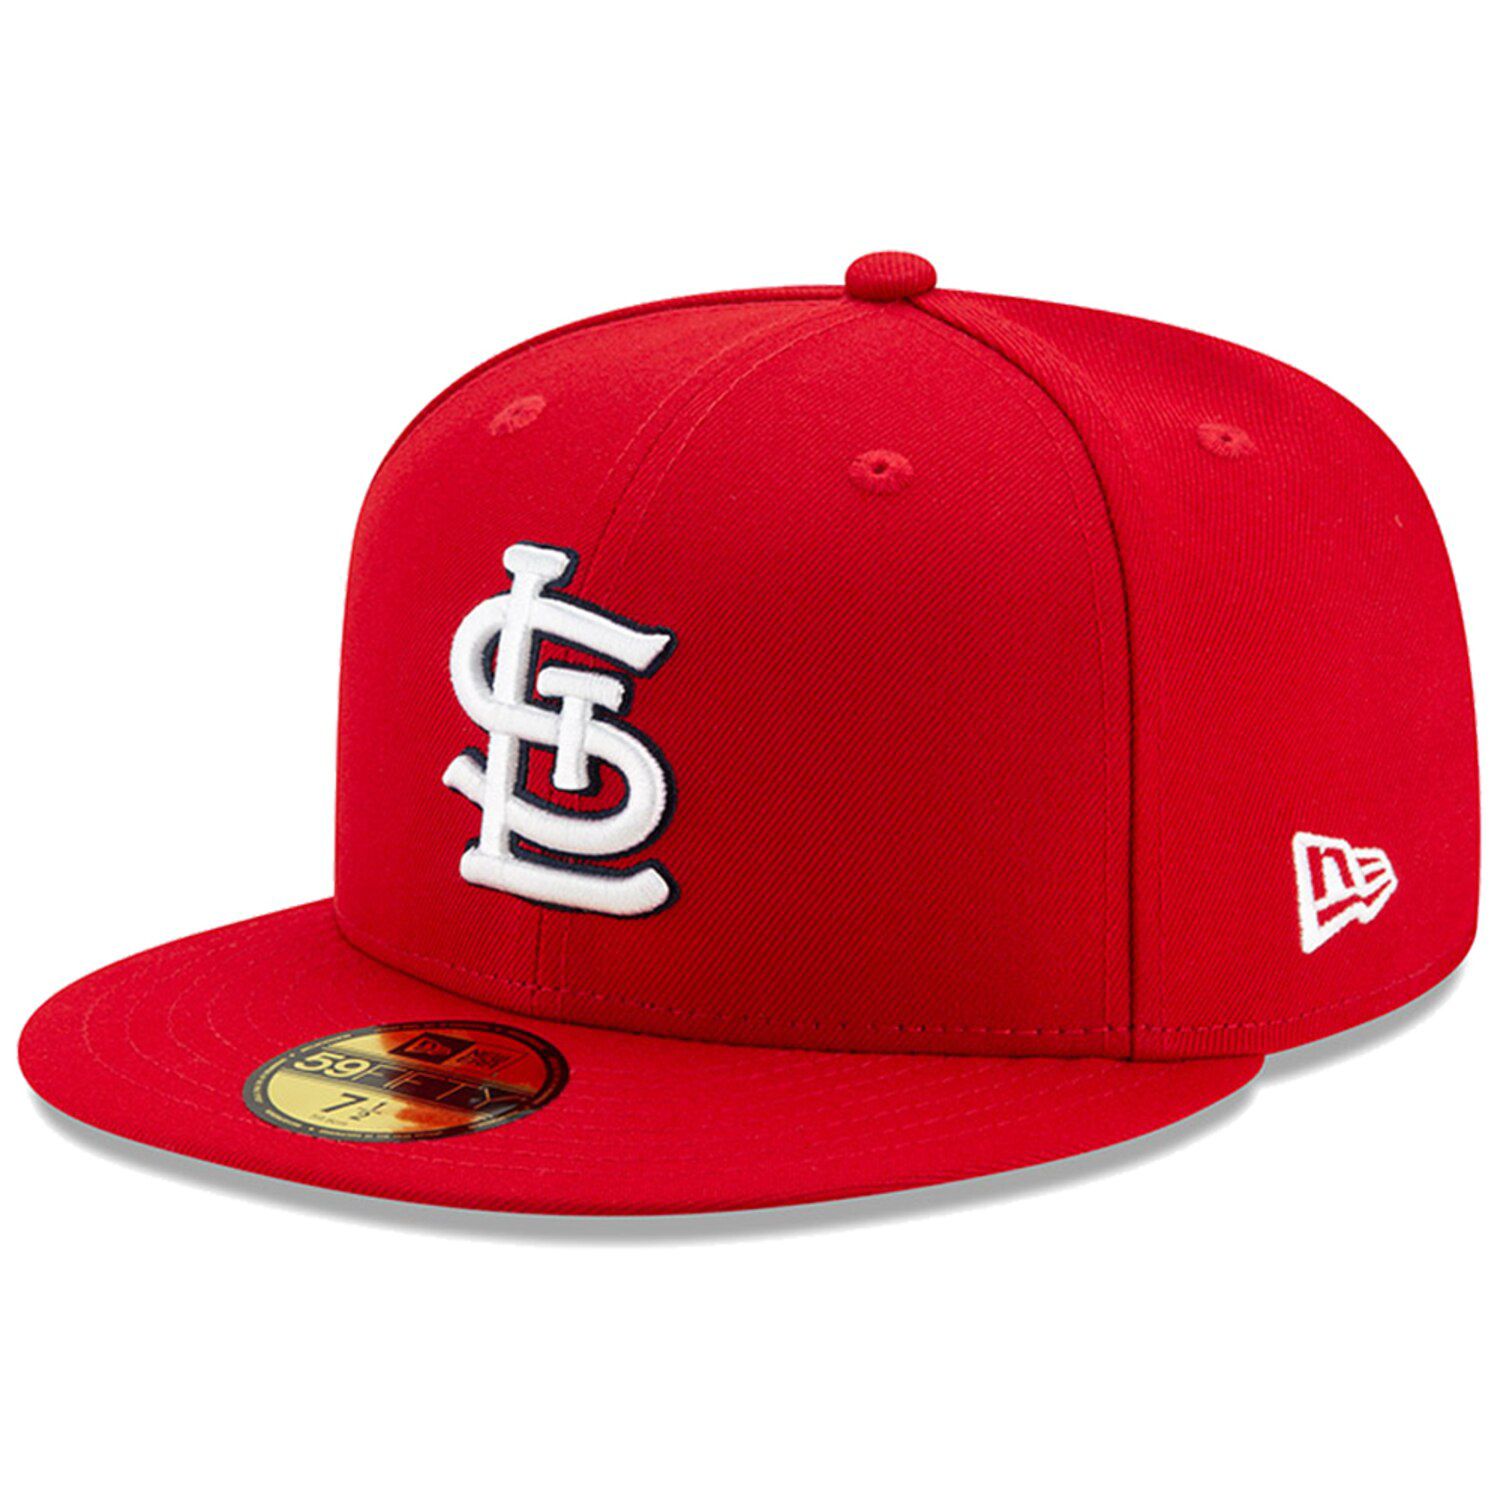 youth cardinals hat